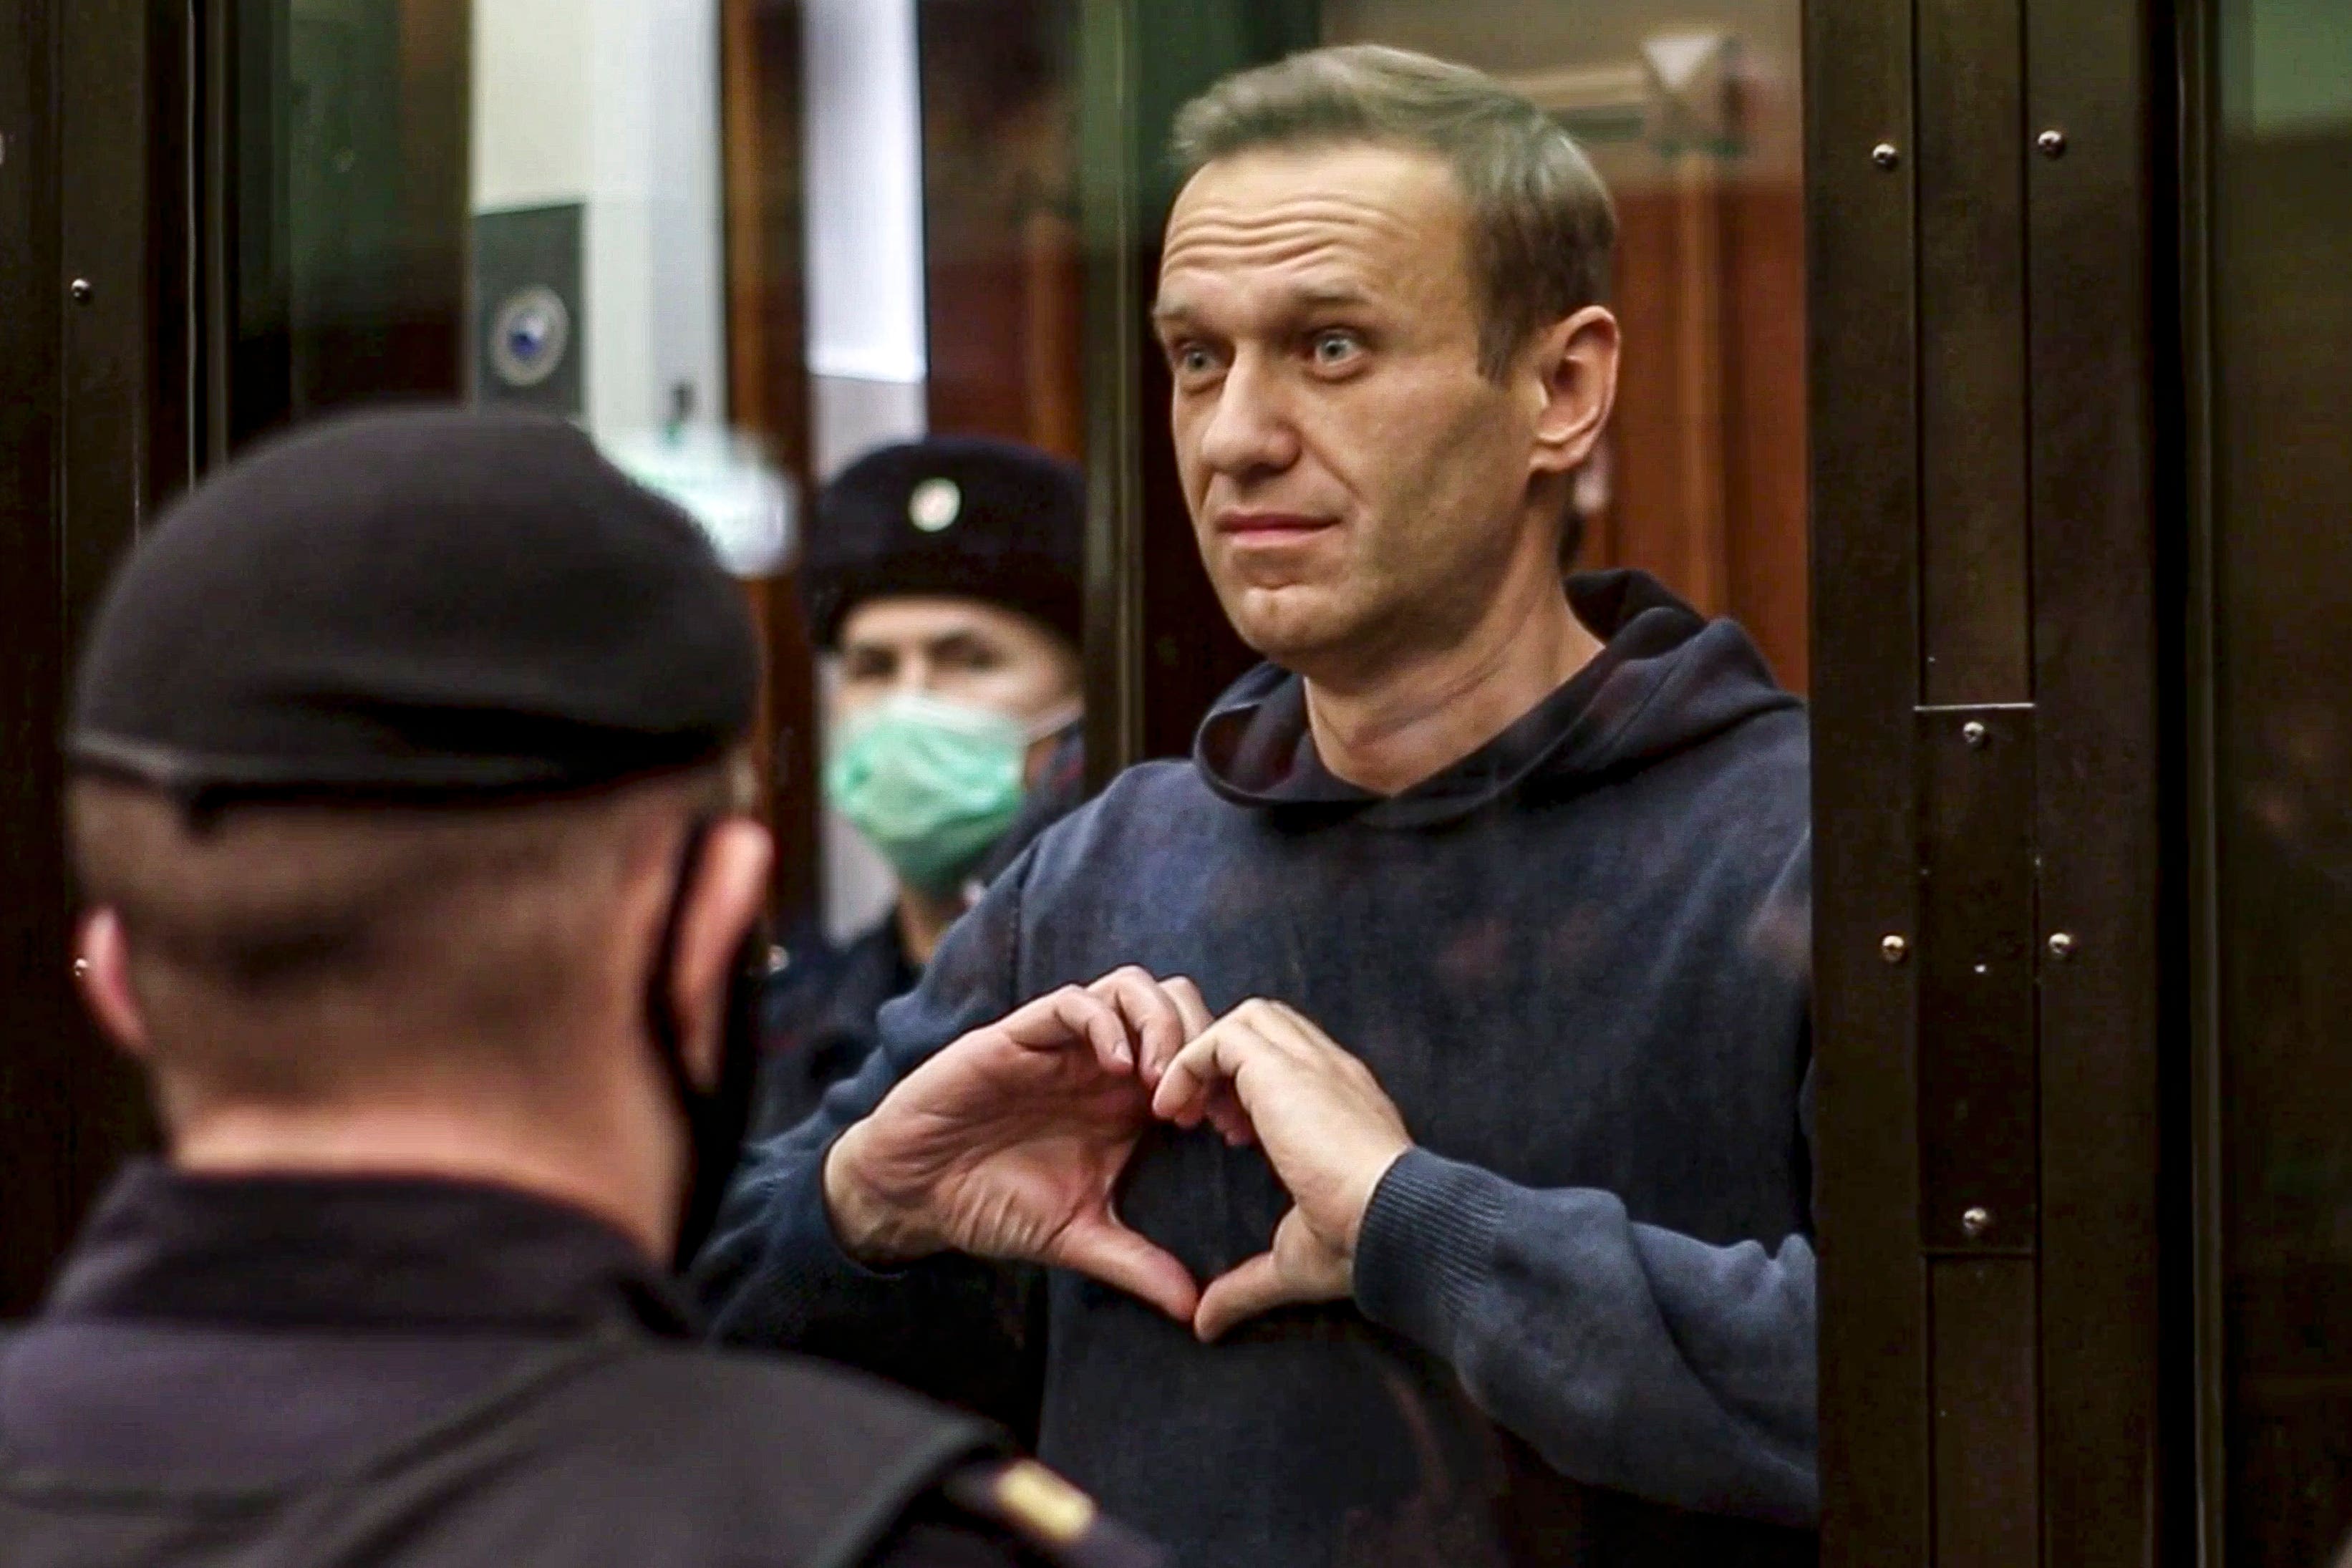 Russia's prison agency announced on Friday that Alexei Navalny had died in the Arctic penal colony where he was serving a 19-year sentence on charges of extremism